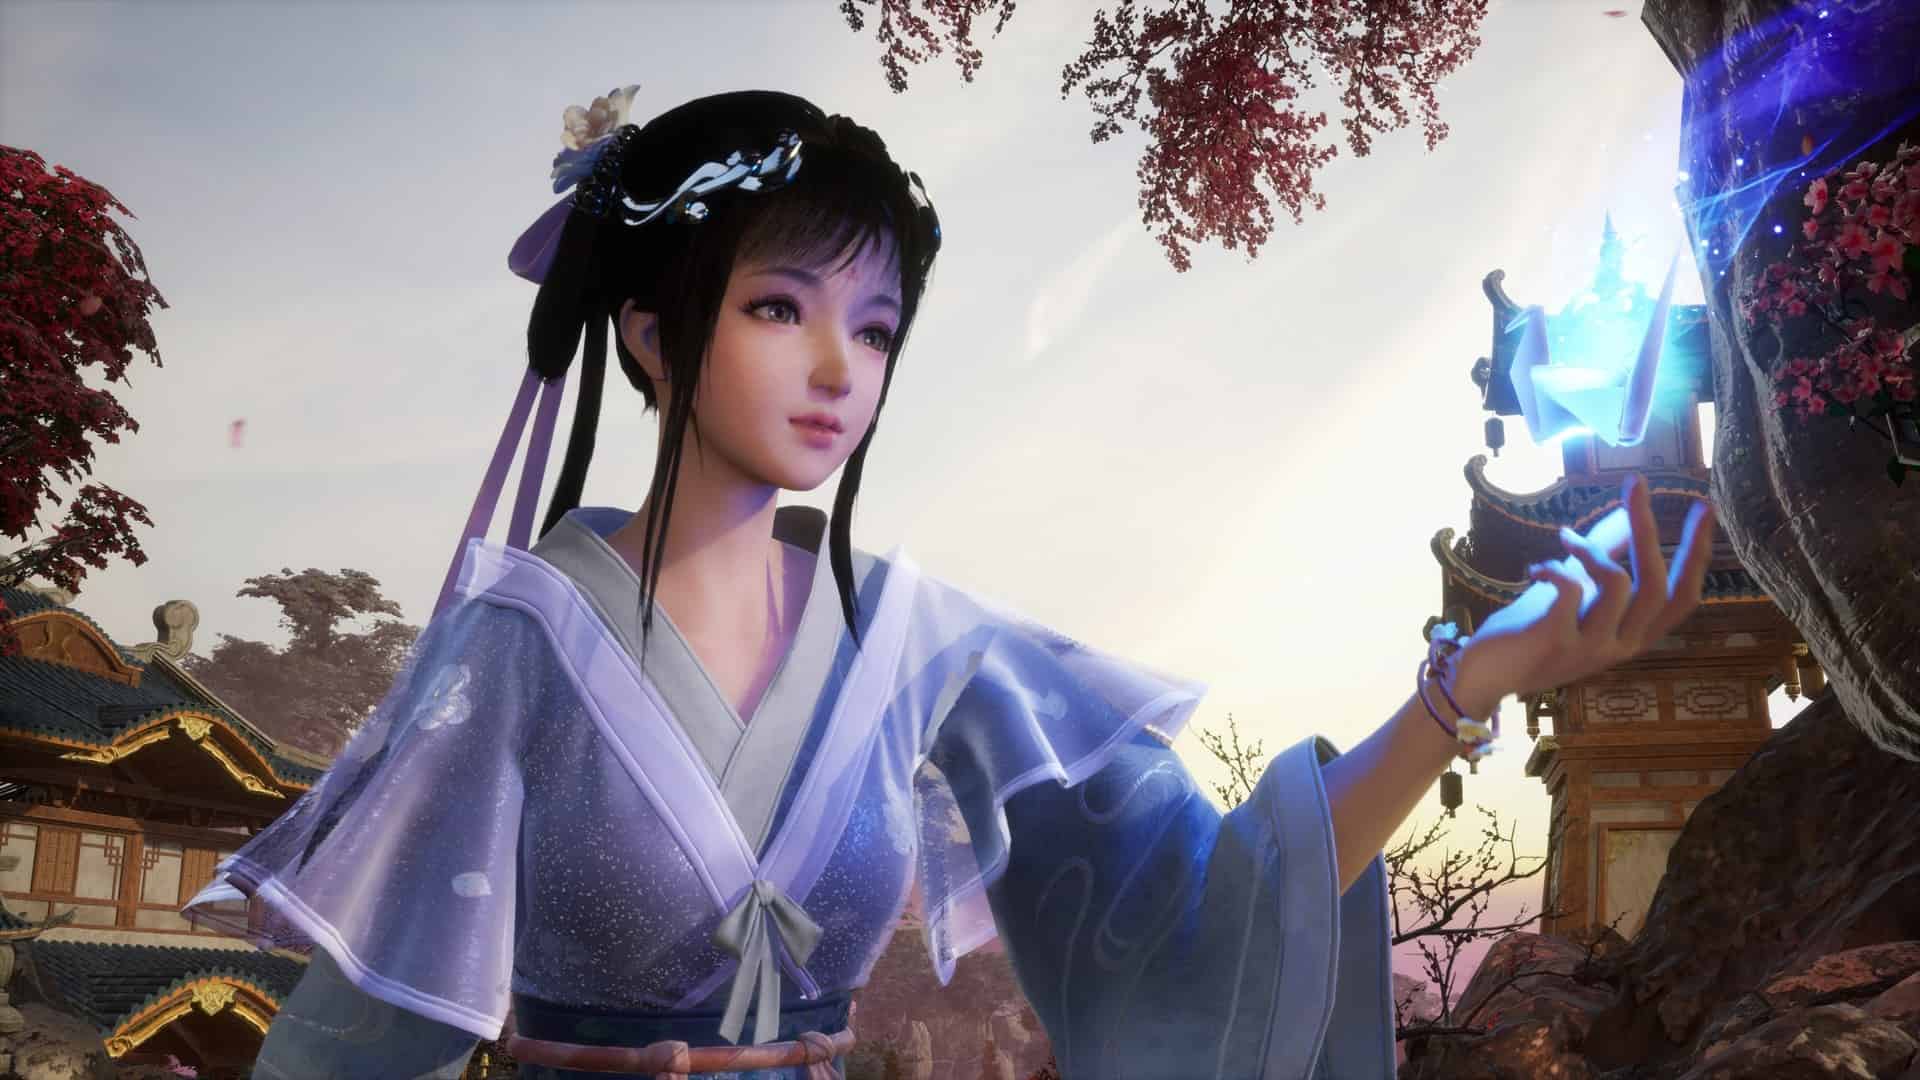 Sword and Fairy: Together Forever (English), Sword and Fairy 7, Xianjian Qixia Zhuan 7, Chinese Paladin: Sword and Fairy 7, Sword and Fairy Together Forever, PS5, PlayStation 5, PS4, PlayStation 4, Asia, Japan, release date, price, pre-order now, features, Screenshots, trailer, Game Source Entertainment